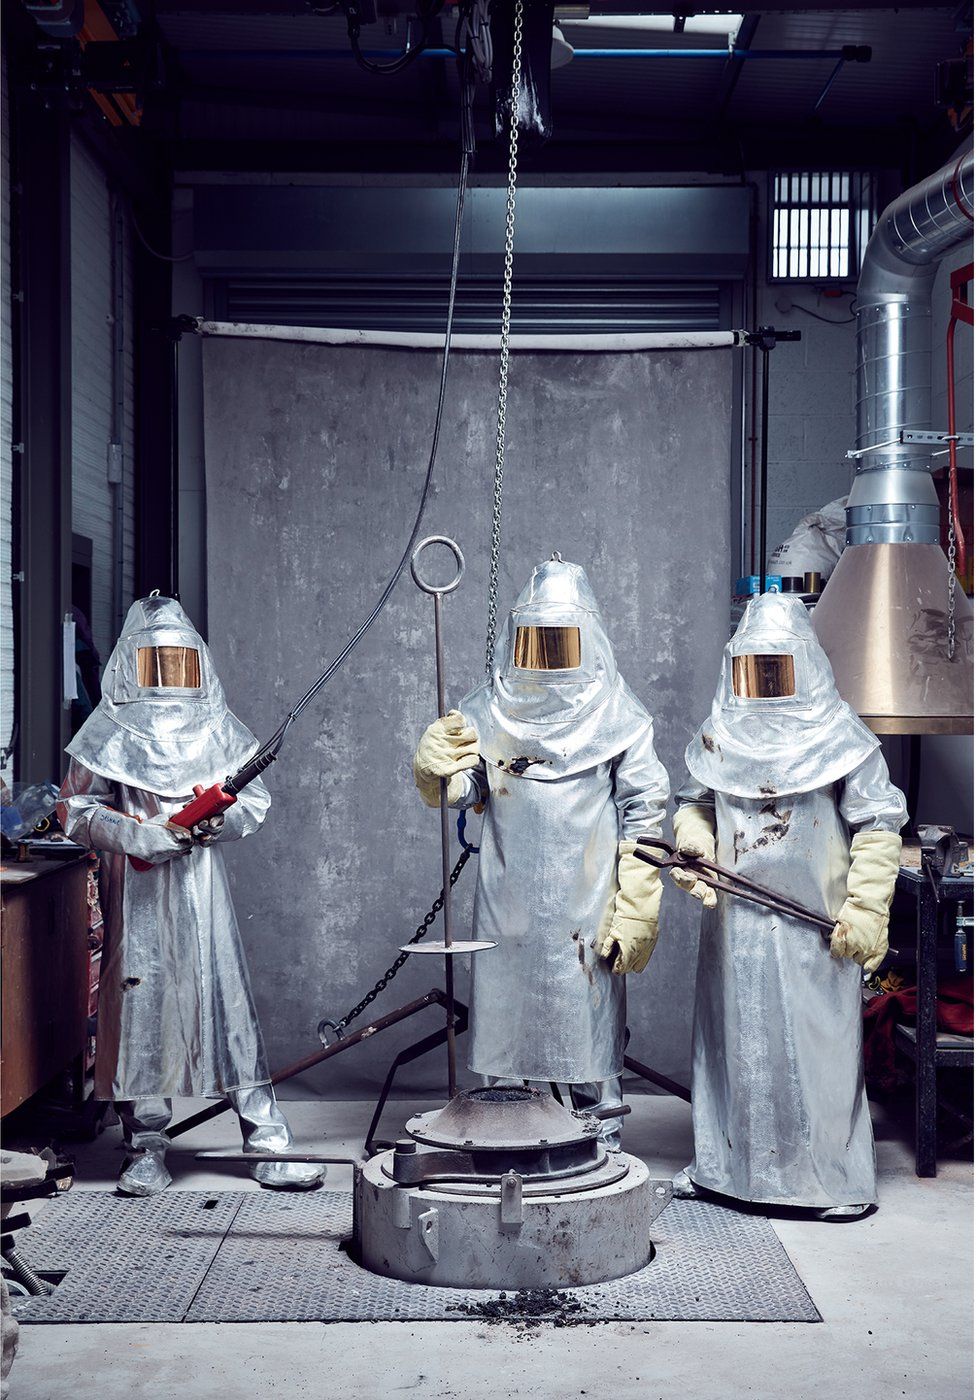 Three metal forgers stand in their protective equipment